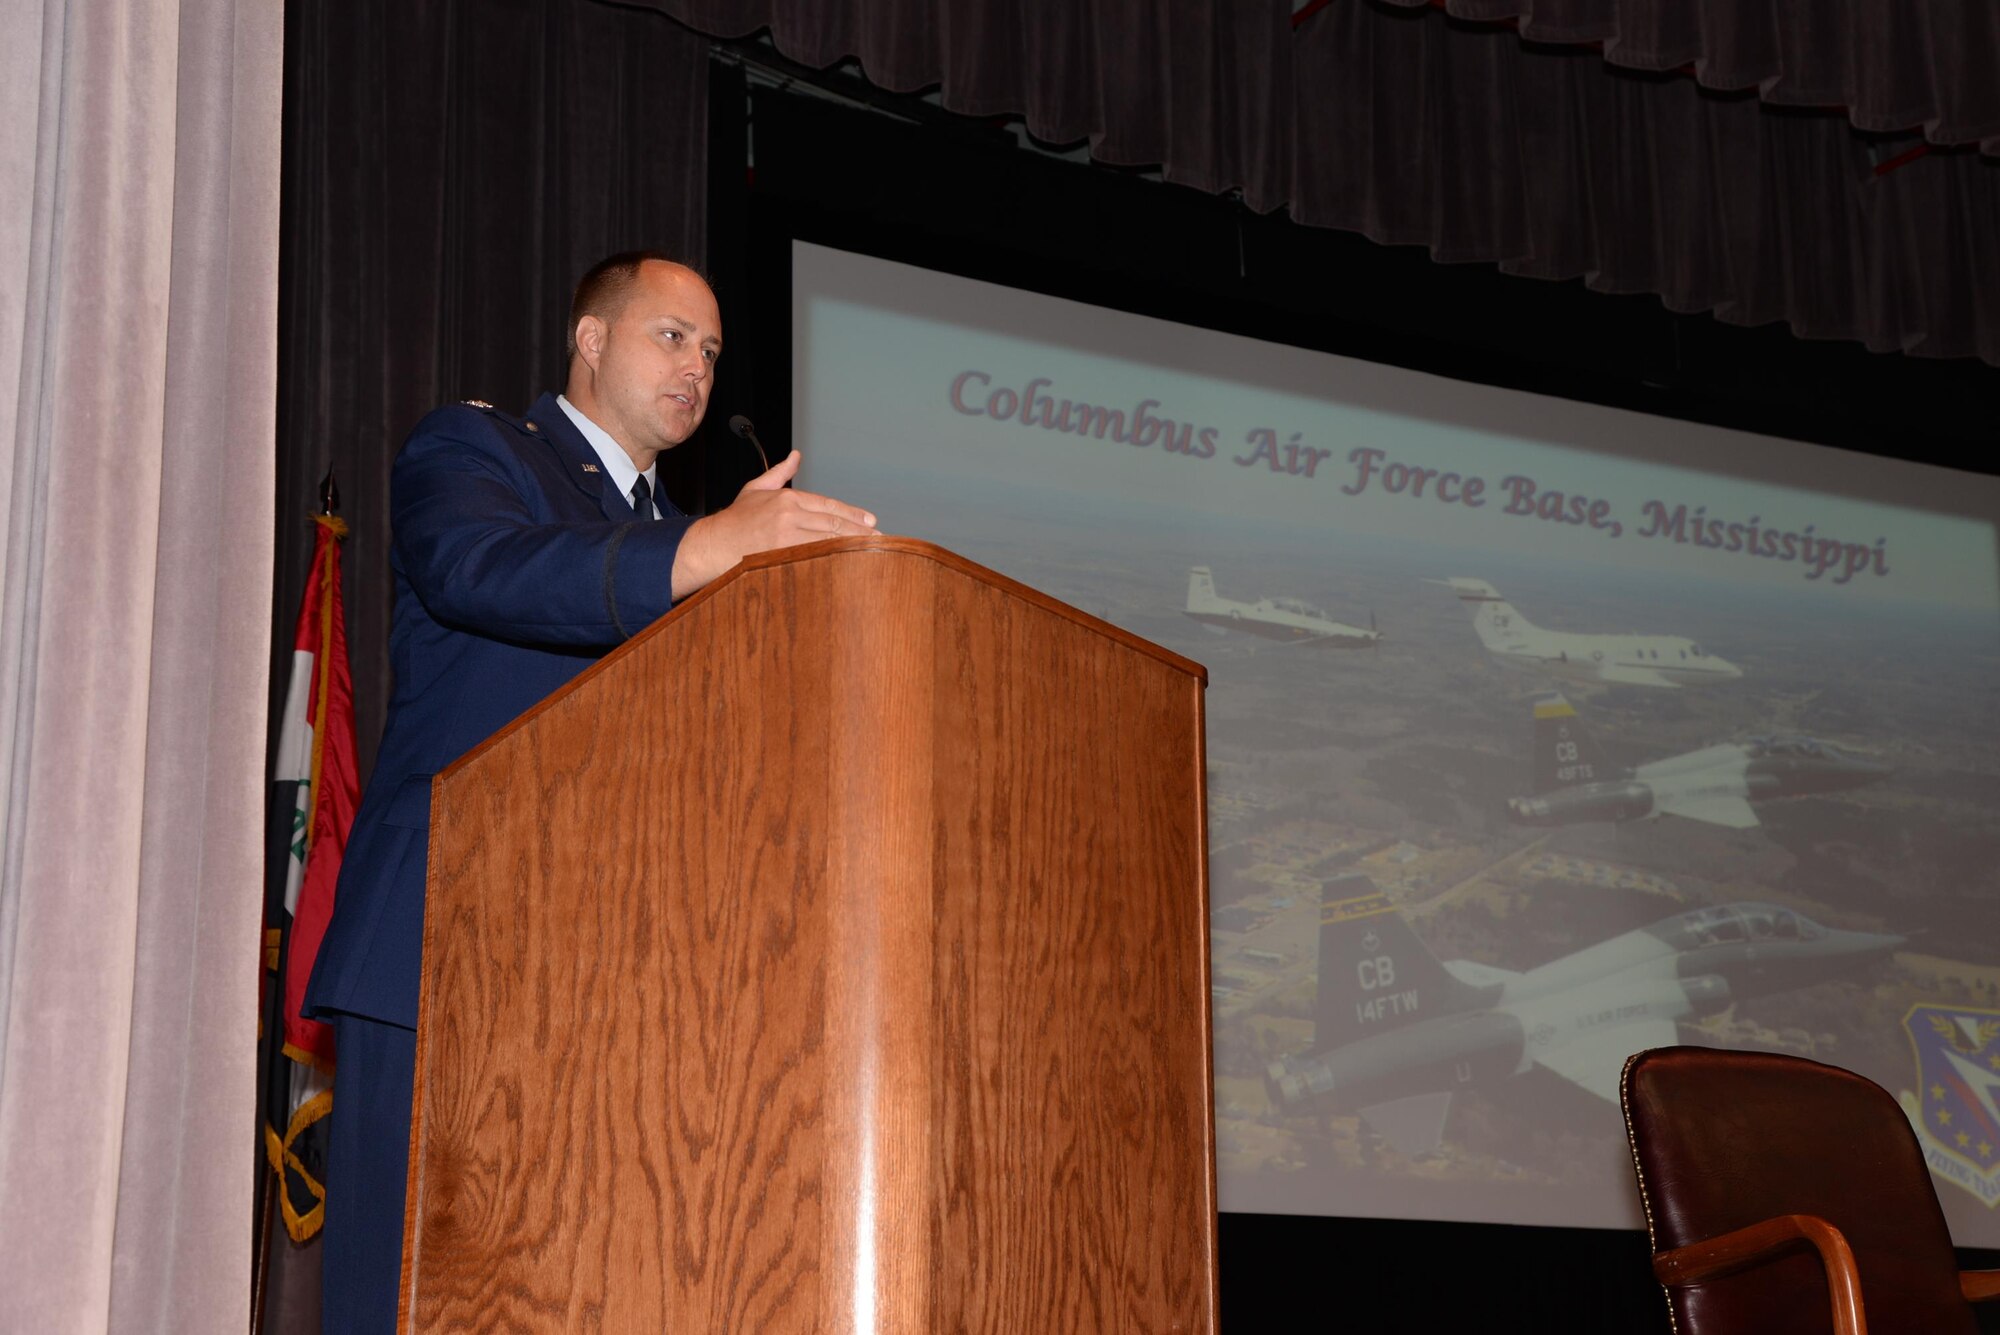 At his very last Specialized Undergraduate Pilot Training Graduation, Col. John Nichols, 14th Flying Training Wing Commander, Columbus Air Force Base, Mississippi, speaks as the speaker for SUPT Class 16-11’s graduation July 8 at the Kaye Auditorium. Nichols spoke about three things he felt were important to not only to the new graduates but also to all others in attendance. (U.S. Air Force photo/Airman 1st Class John Day)